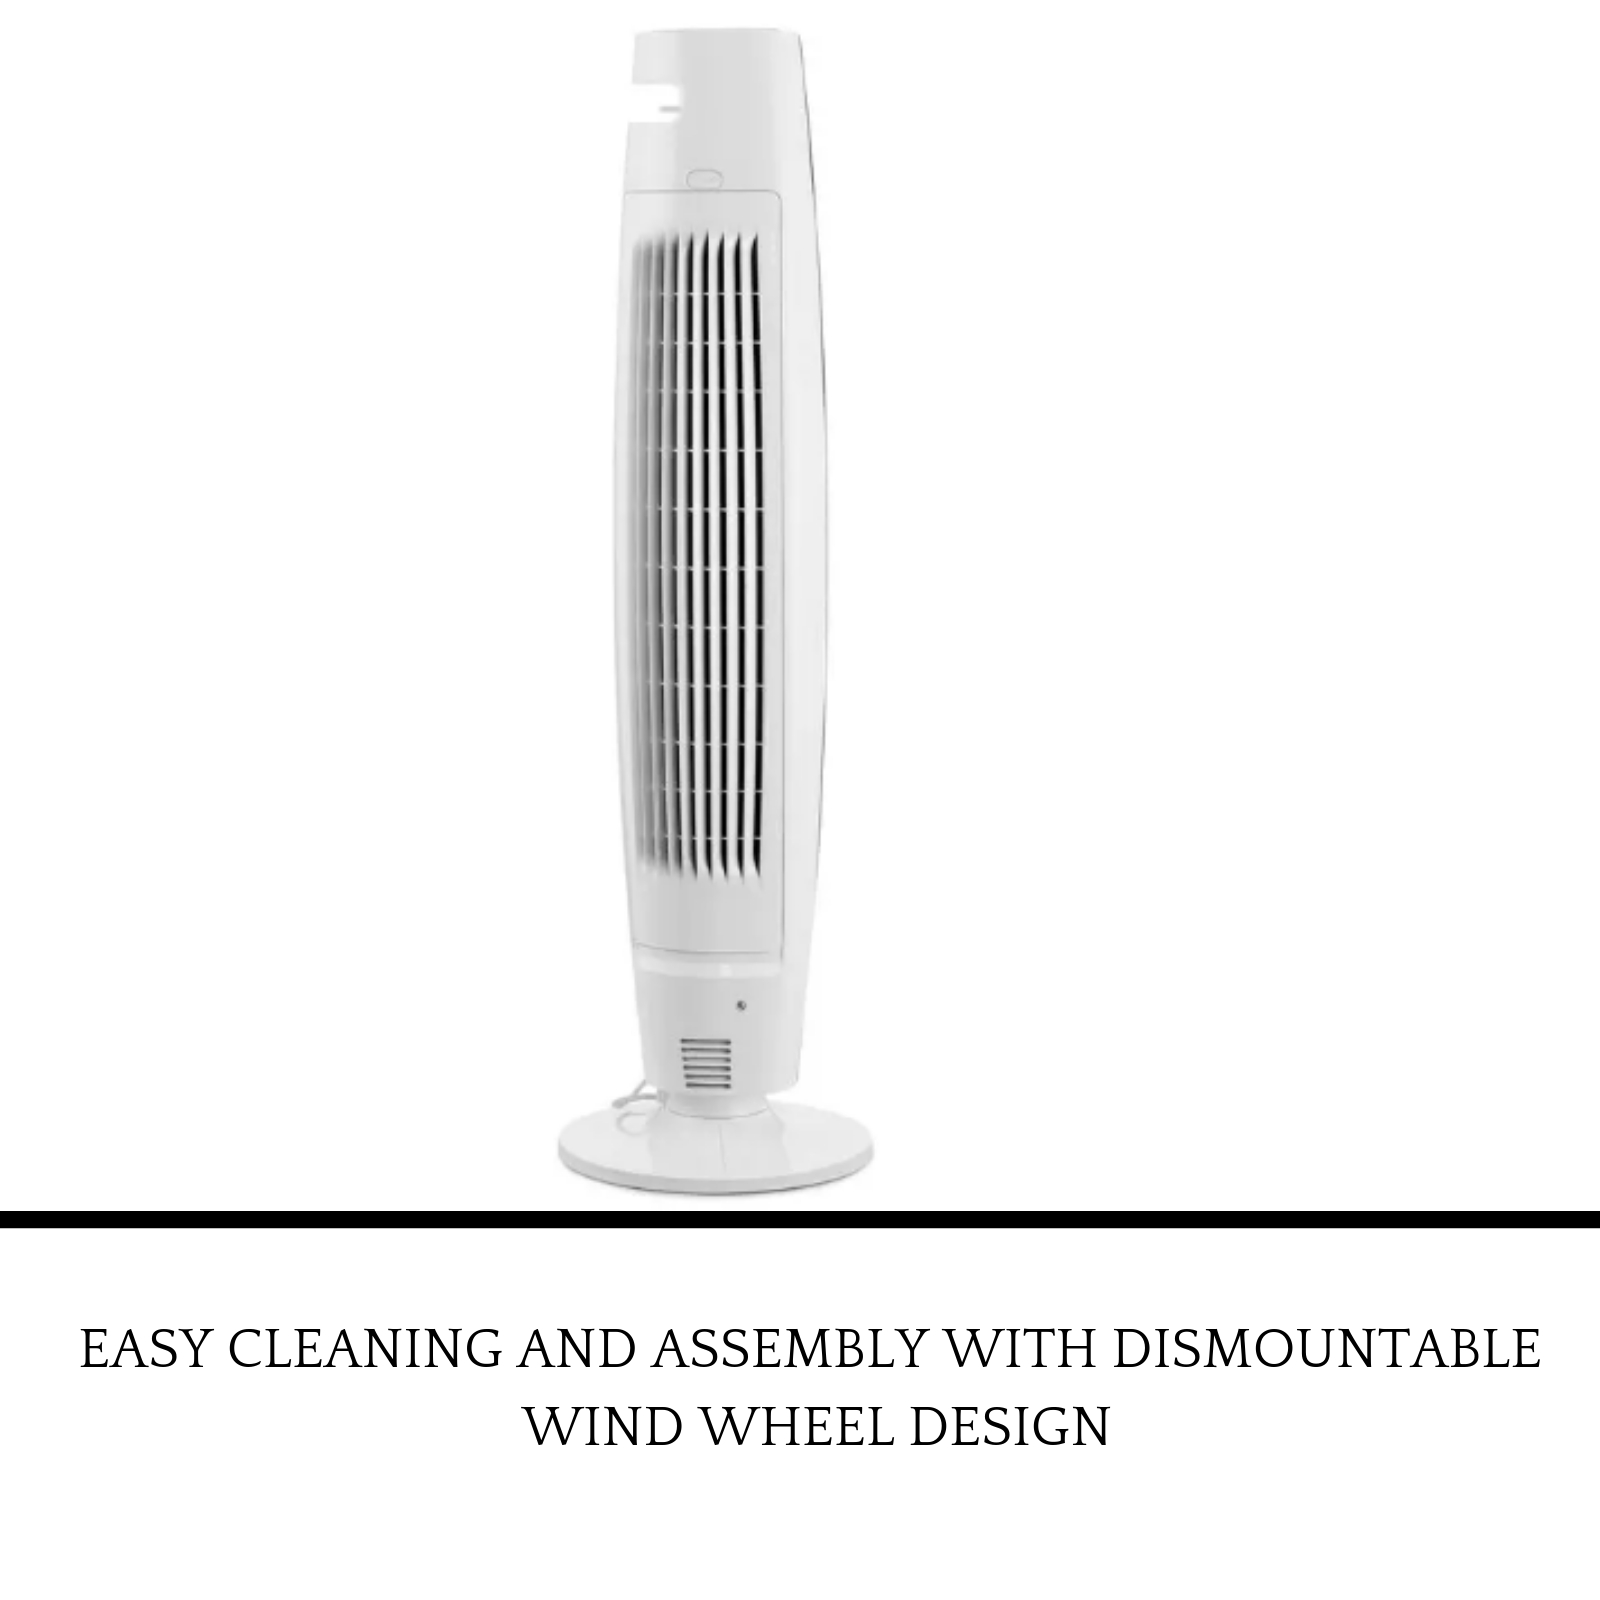 Details About Kogan Clear Cool Tower Fan New Portable Oscillating Touch Fan Wremote Control pertaining to measurements 1600 X 1600